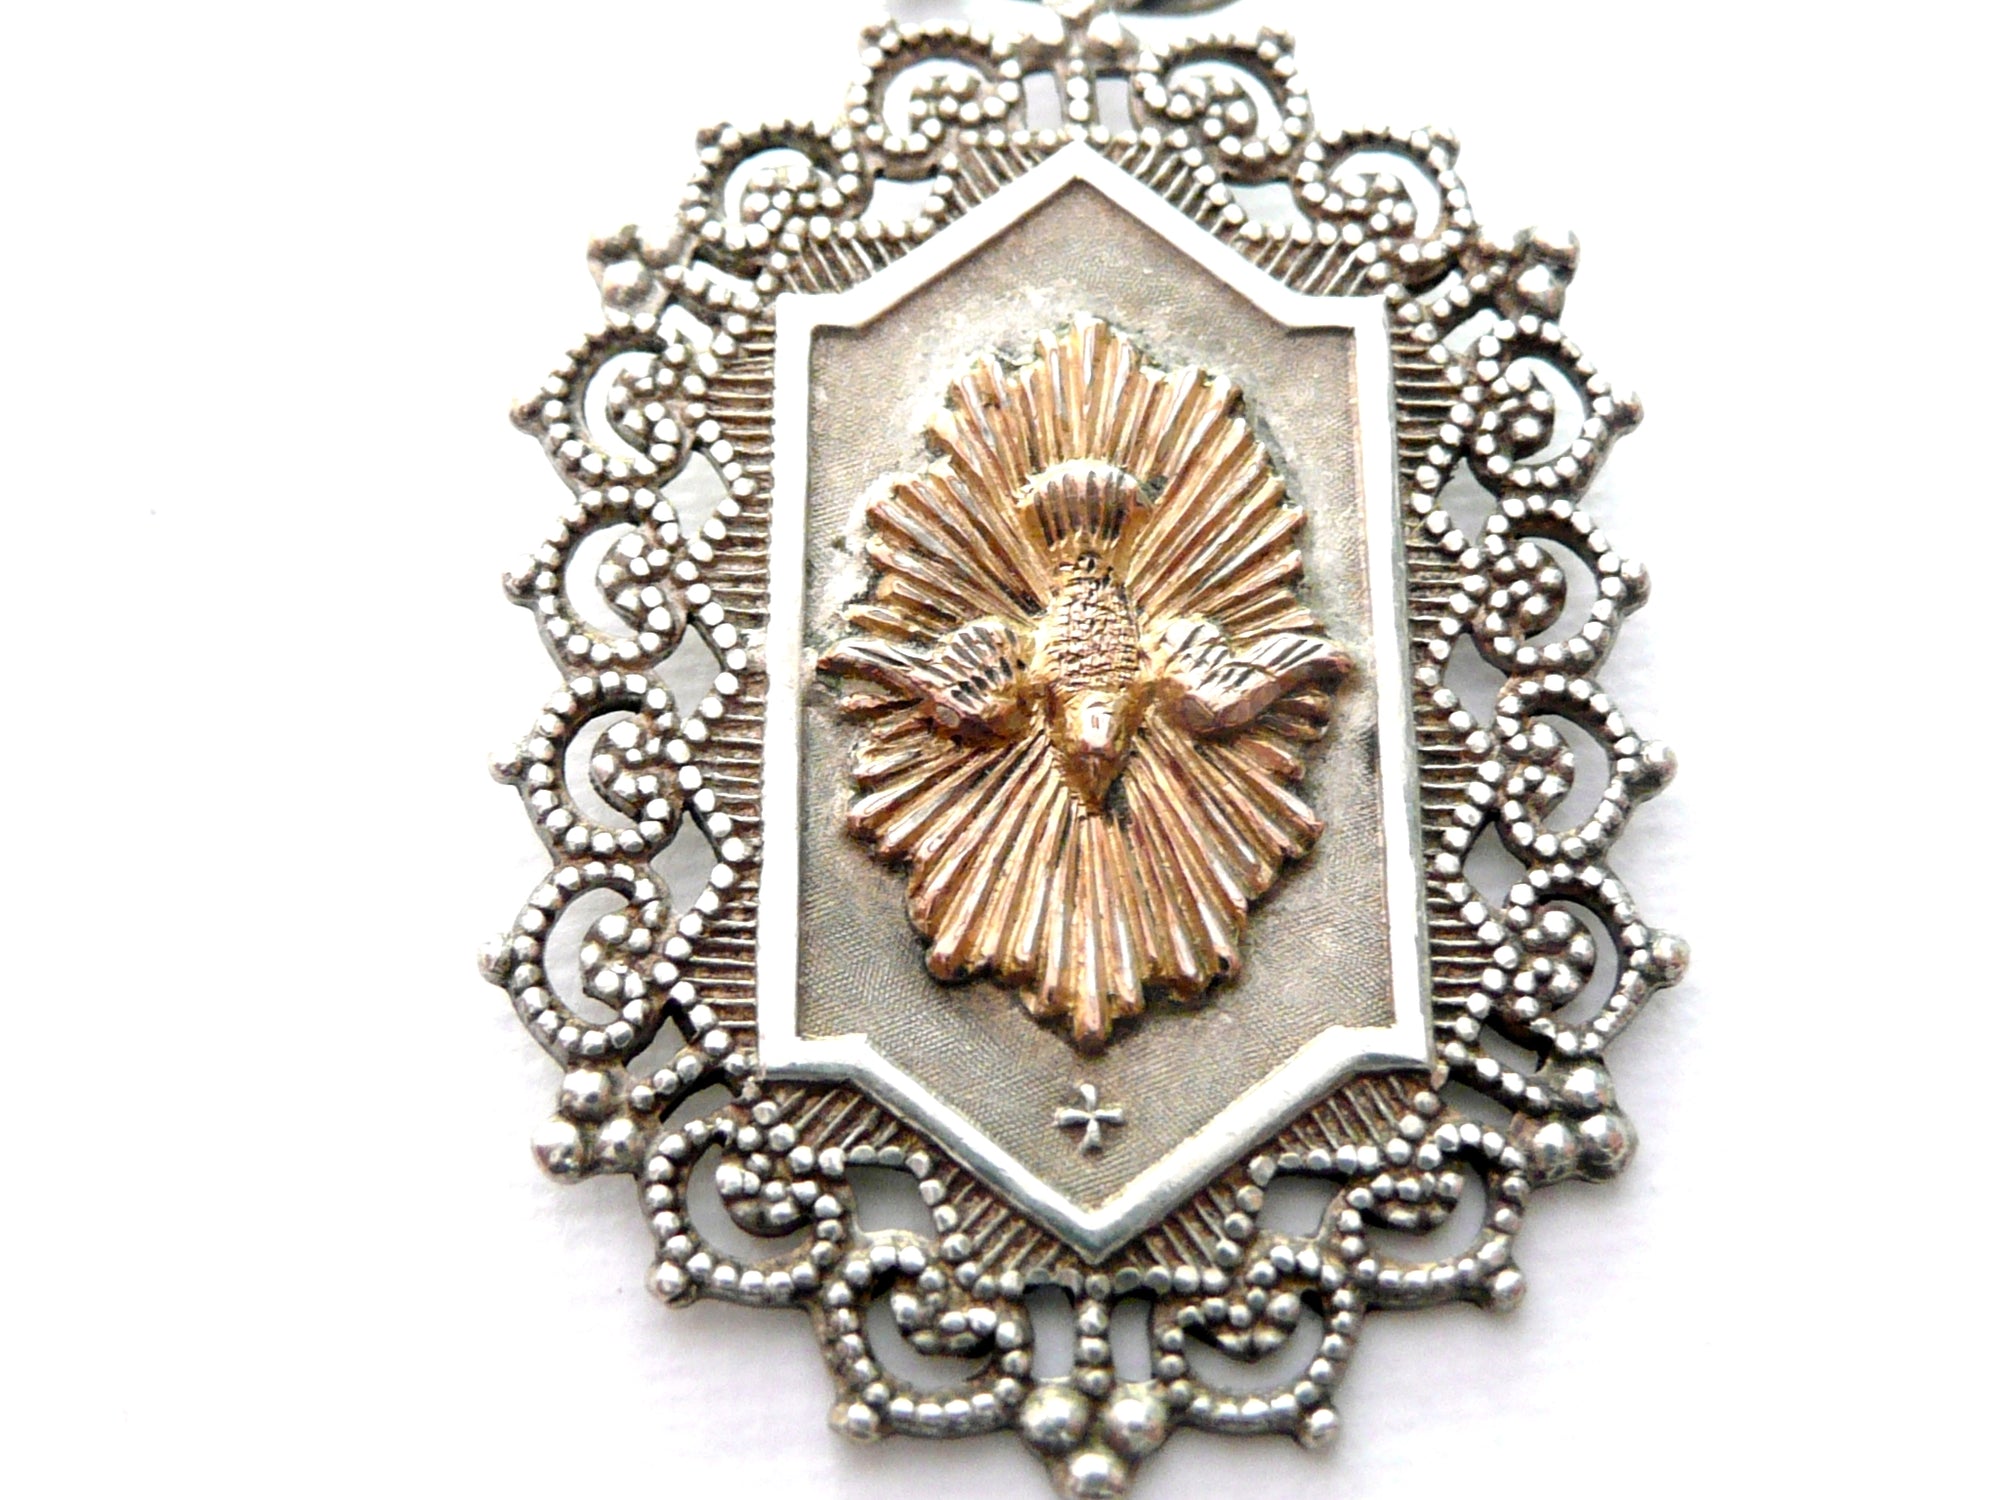 Antique French Silver and Gold Holy Spirit Medal, Confirmation Medal